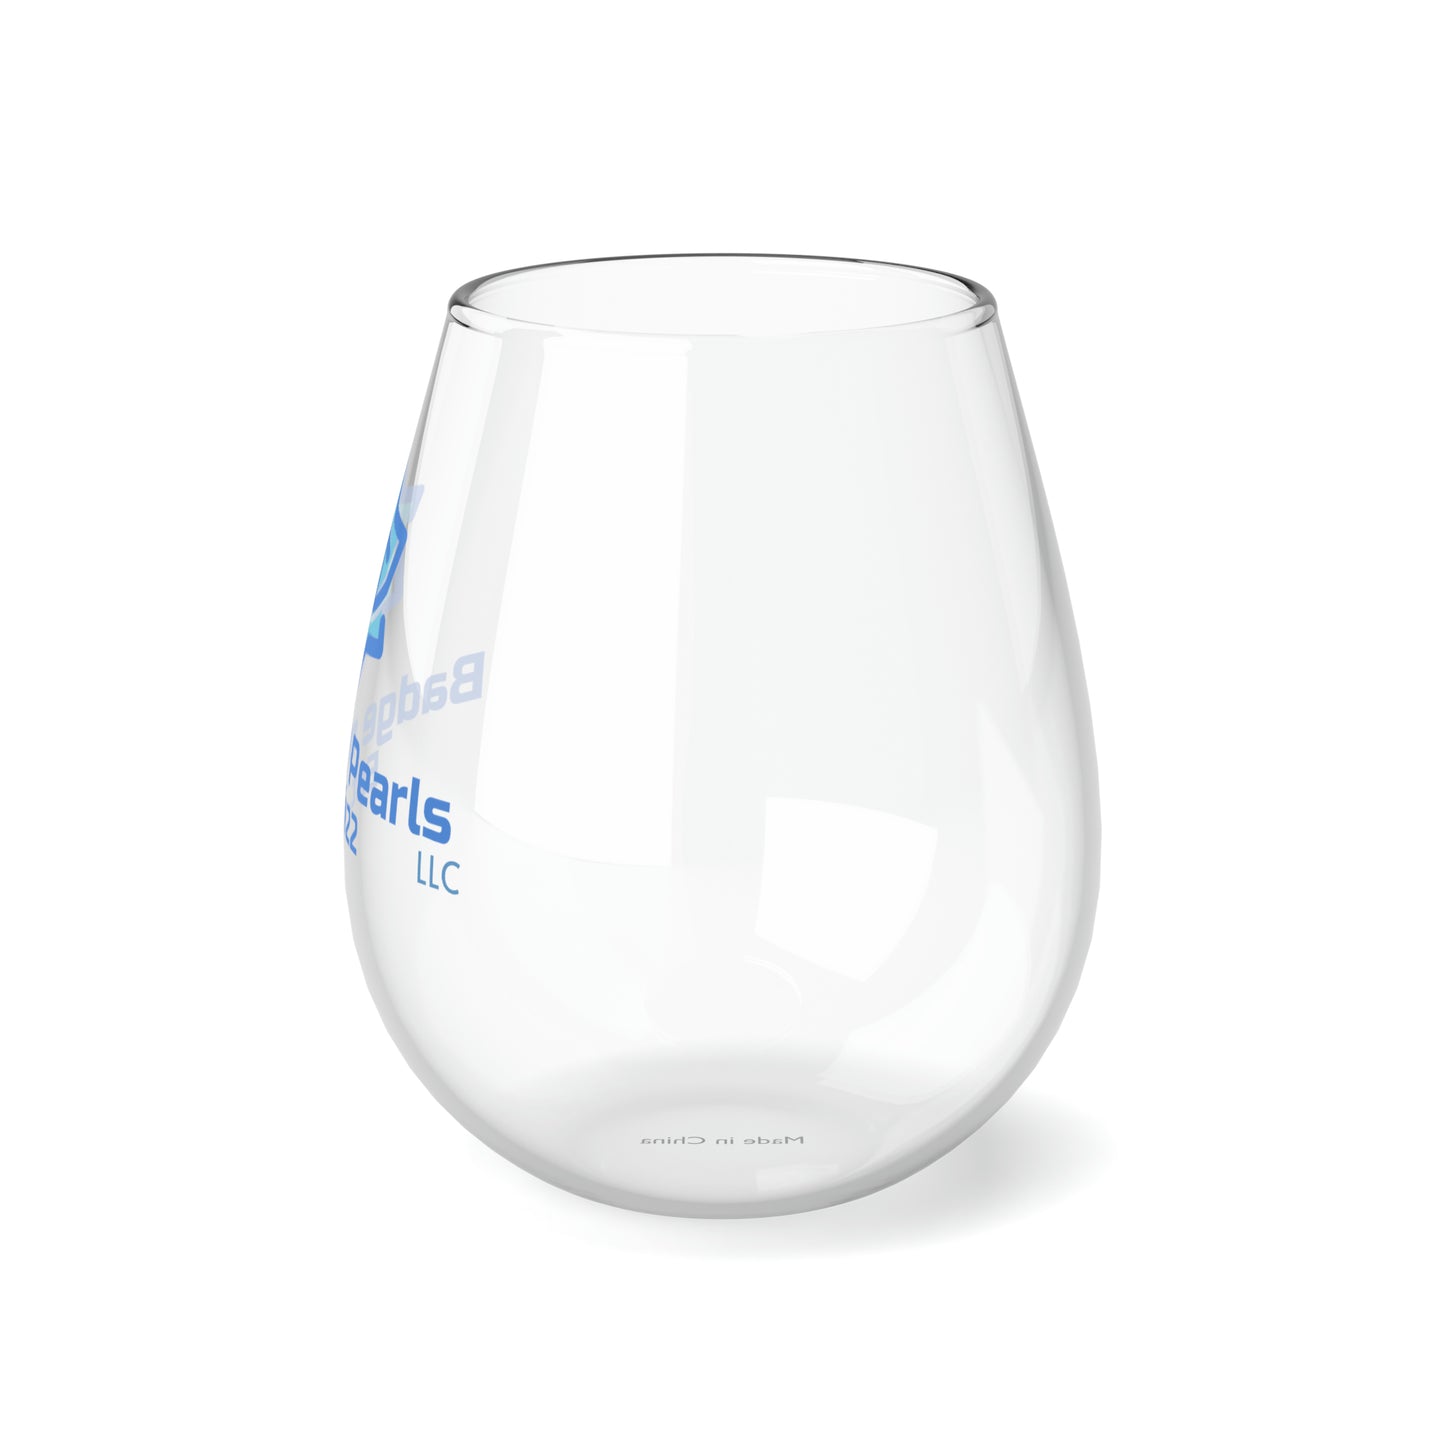 Badge of Pearls Stemless Wine Glass, 11.75oz